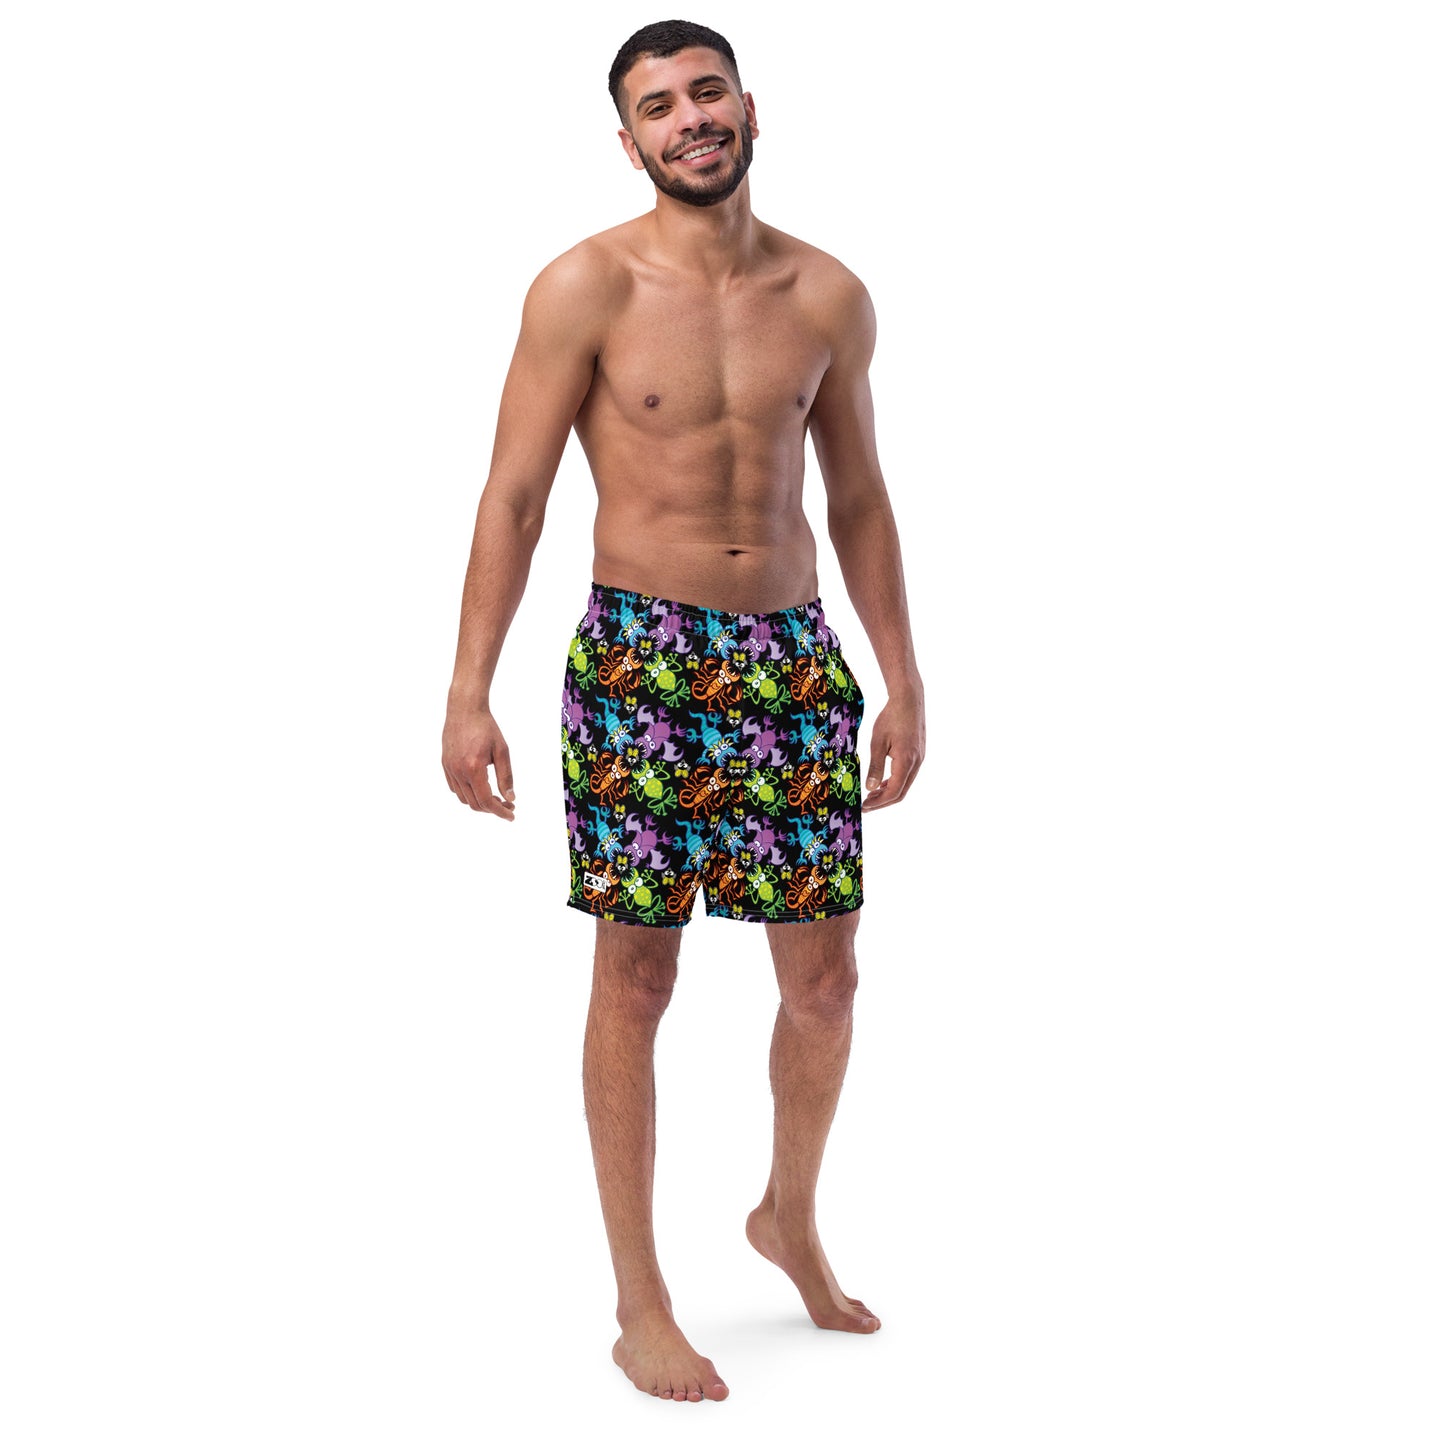 Smiling man wearing Swim Trunks All-over printed with Bat, scorpion, lizard and frog fighting over an unlucky fly